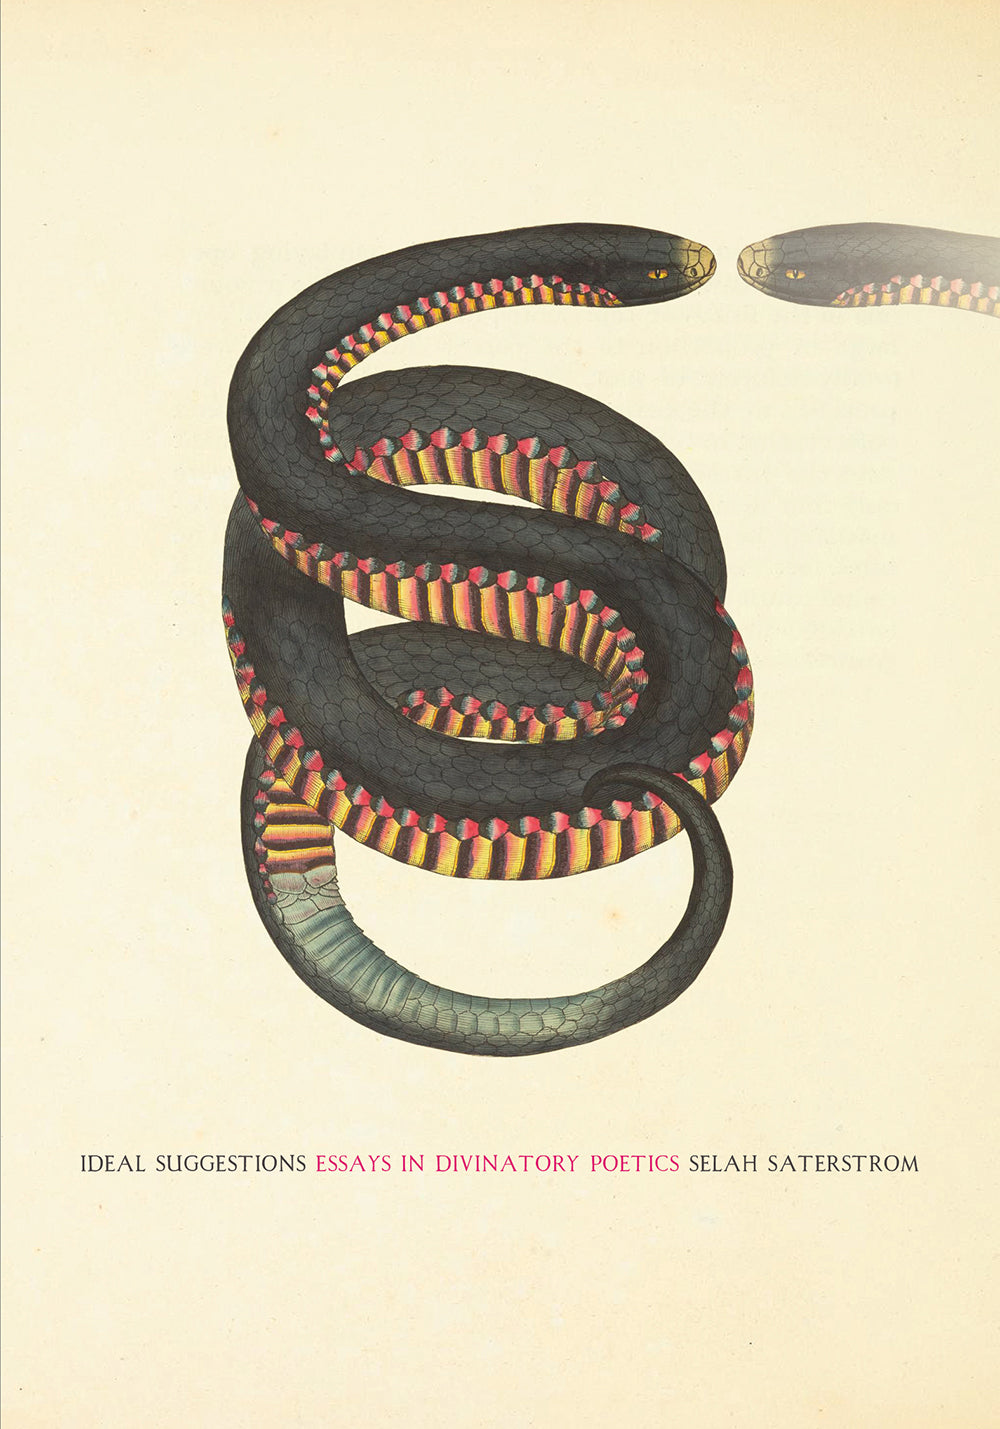 Ideal Suggestions: Essays in Divinatory Poetics, by Selah Saterstrom